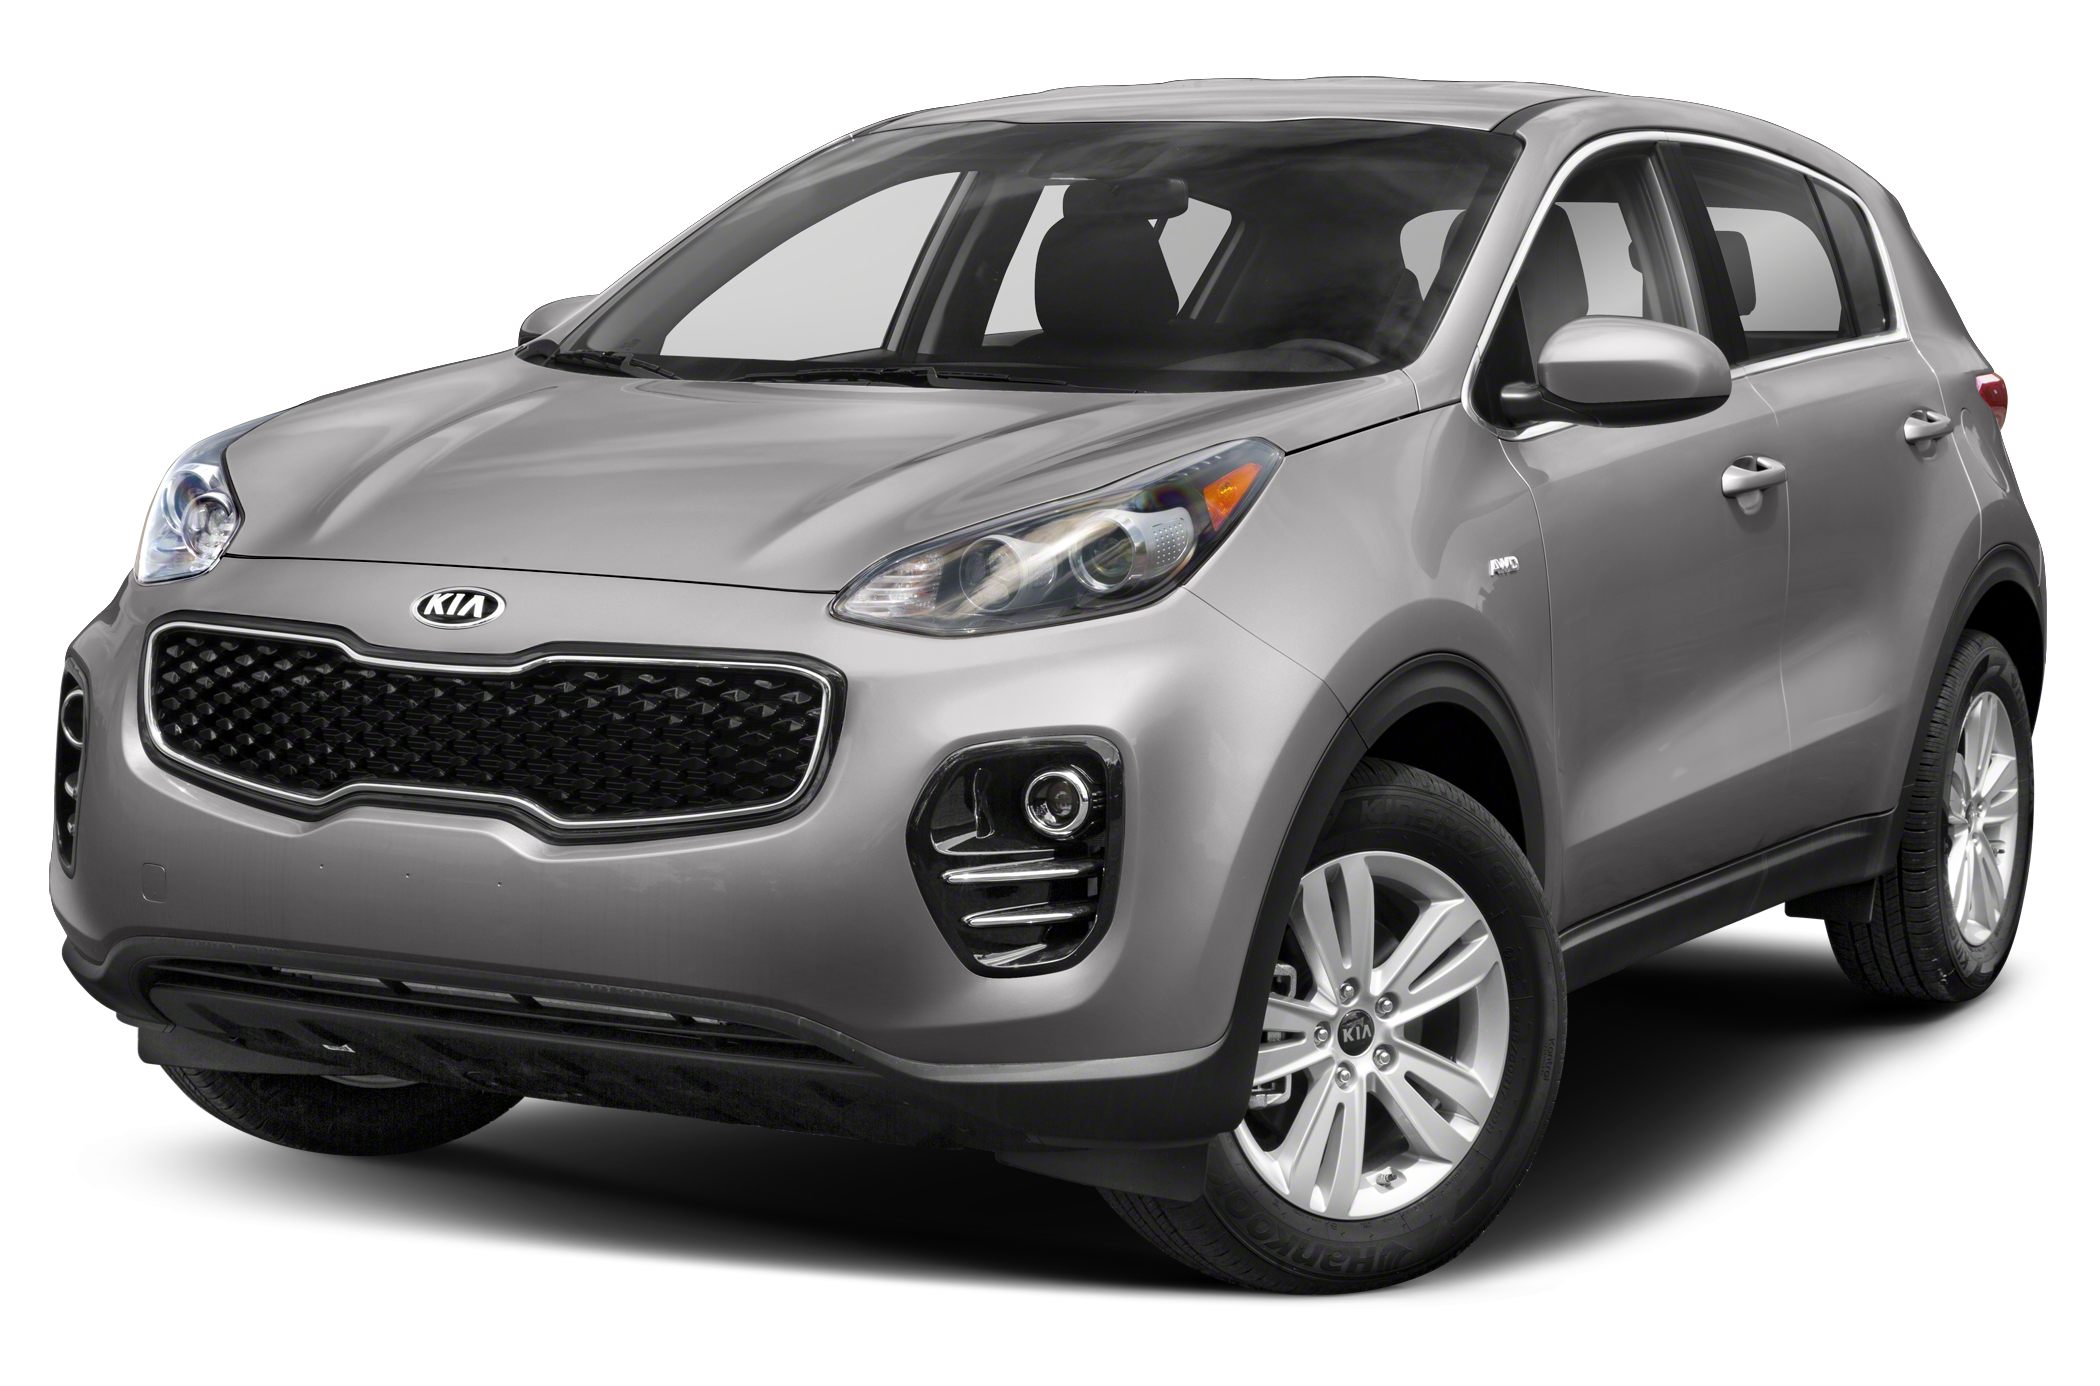 2019 Kia Sportage Lx 4dr All Wheel Drive Pictures